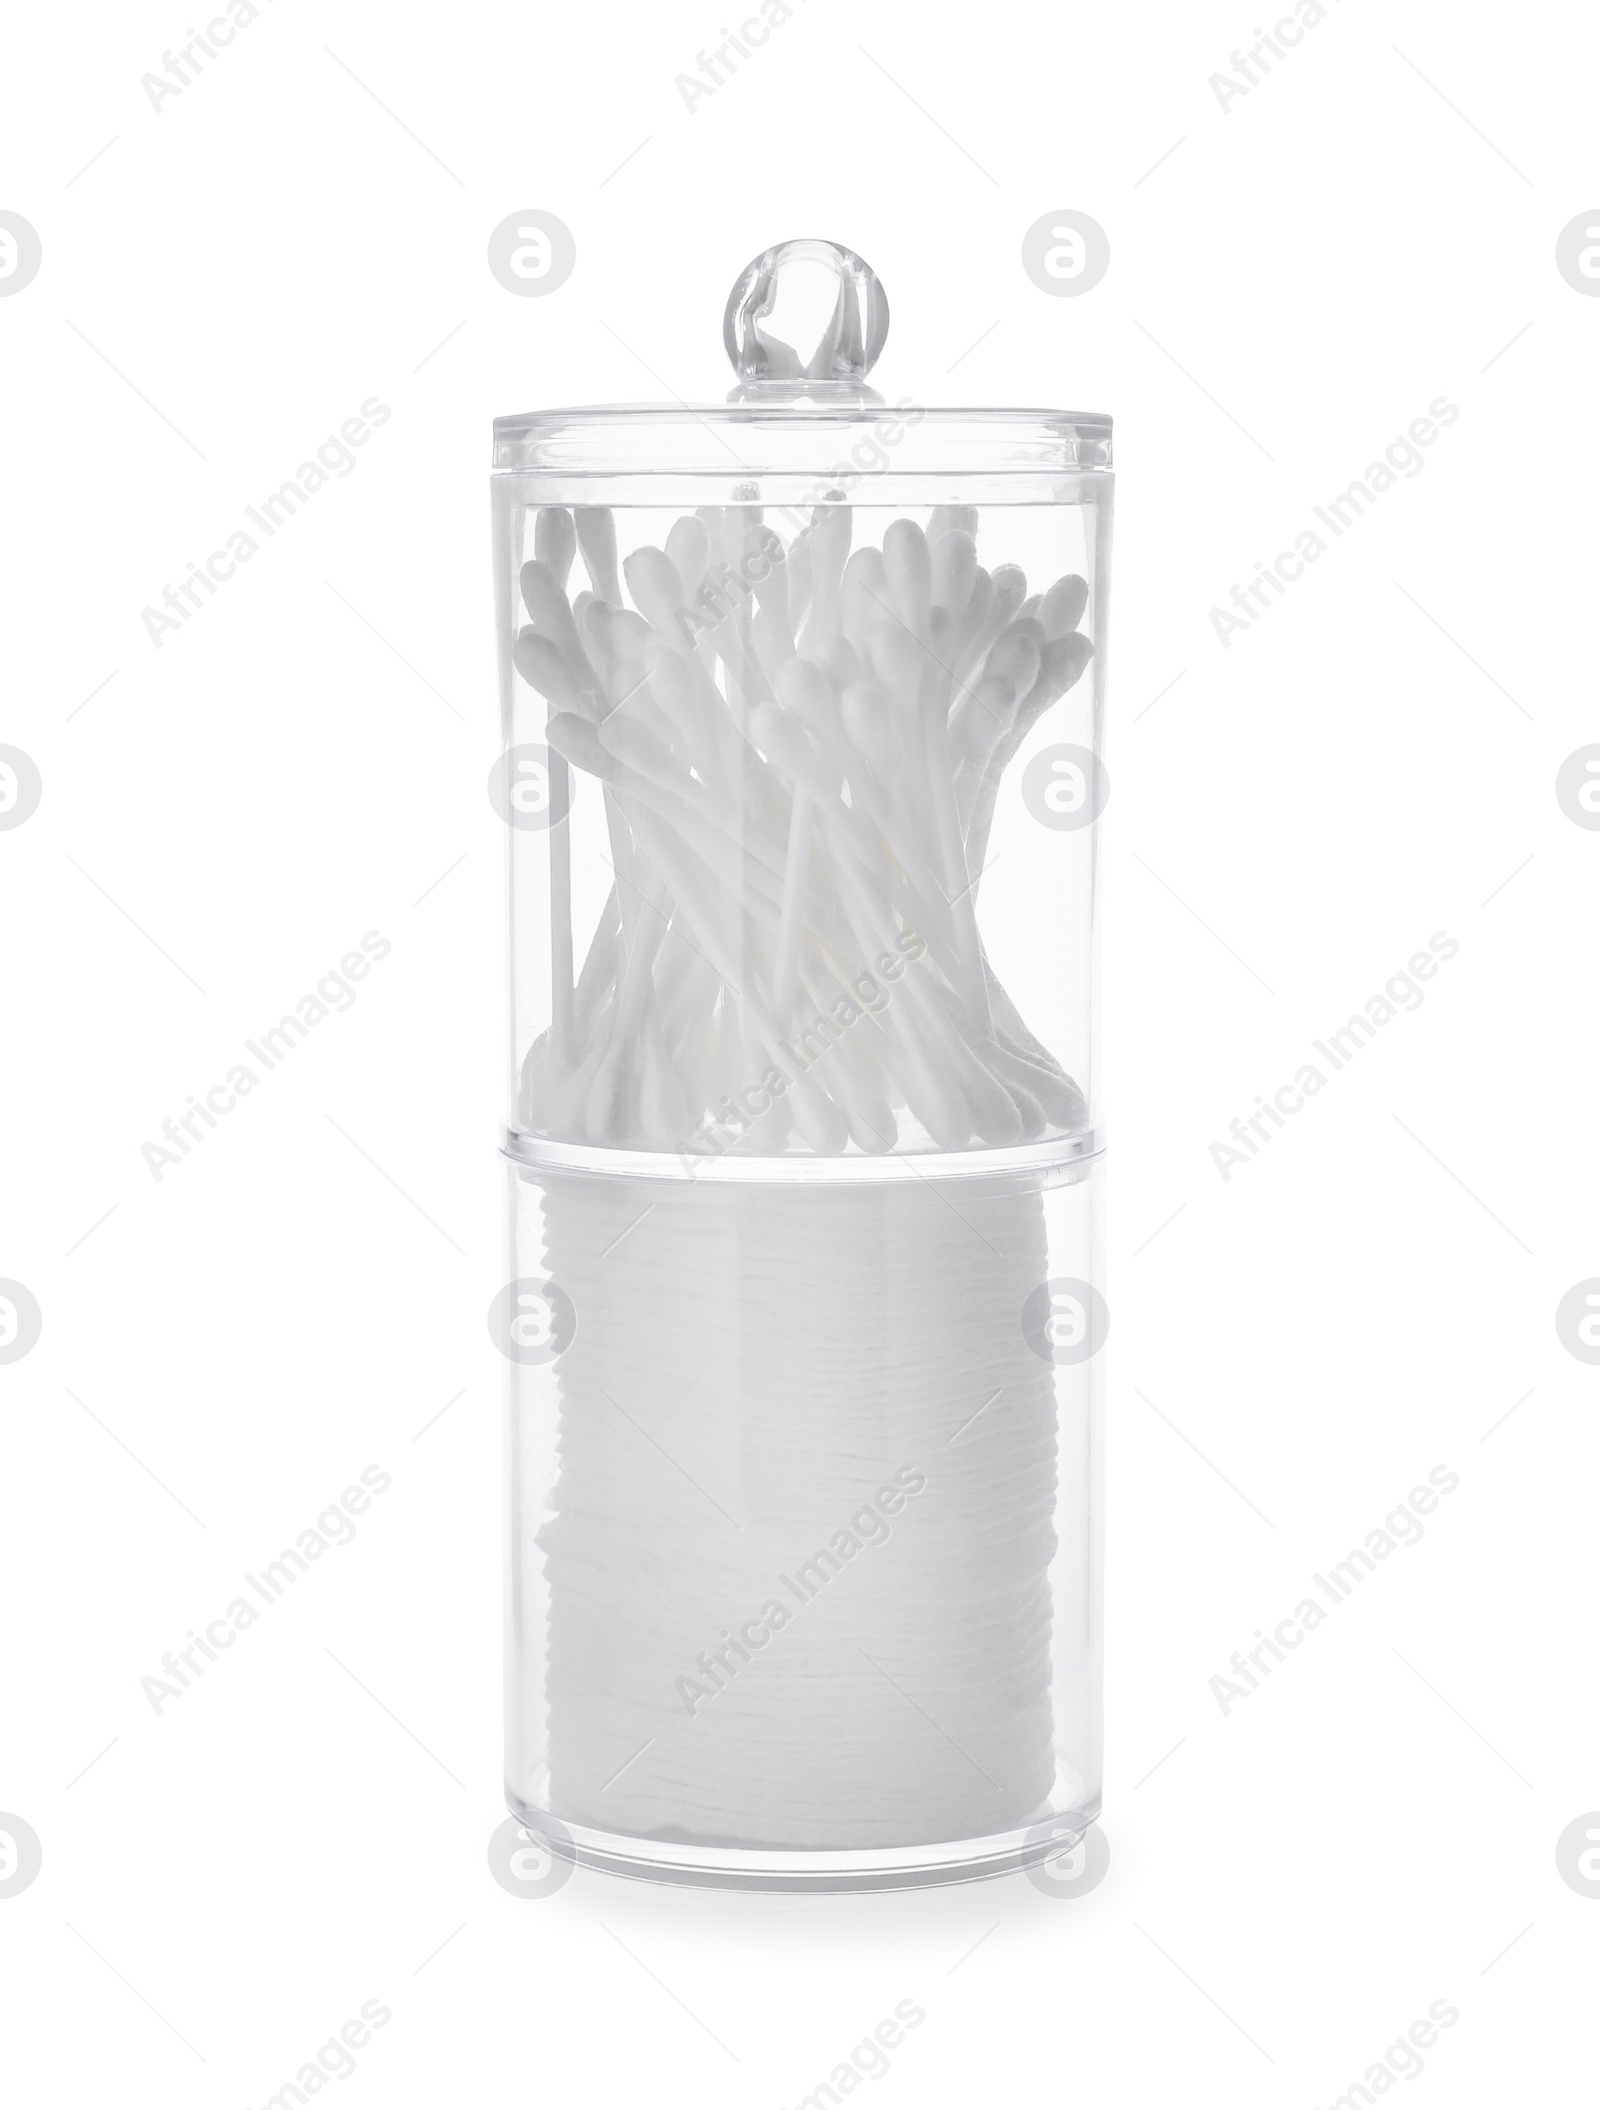 Photo of Cotton pads and swabs in plastic jars on white background